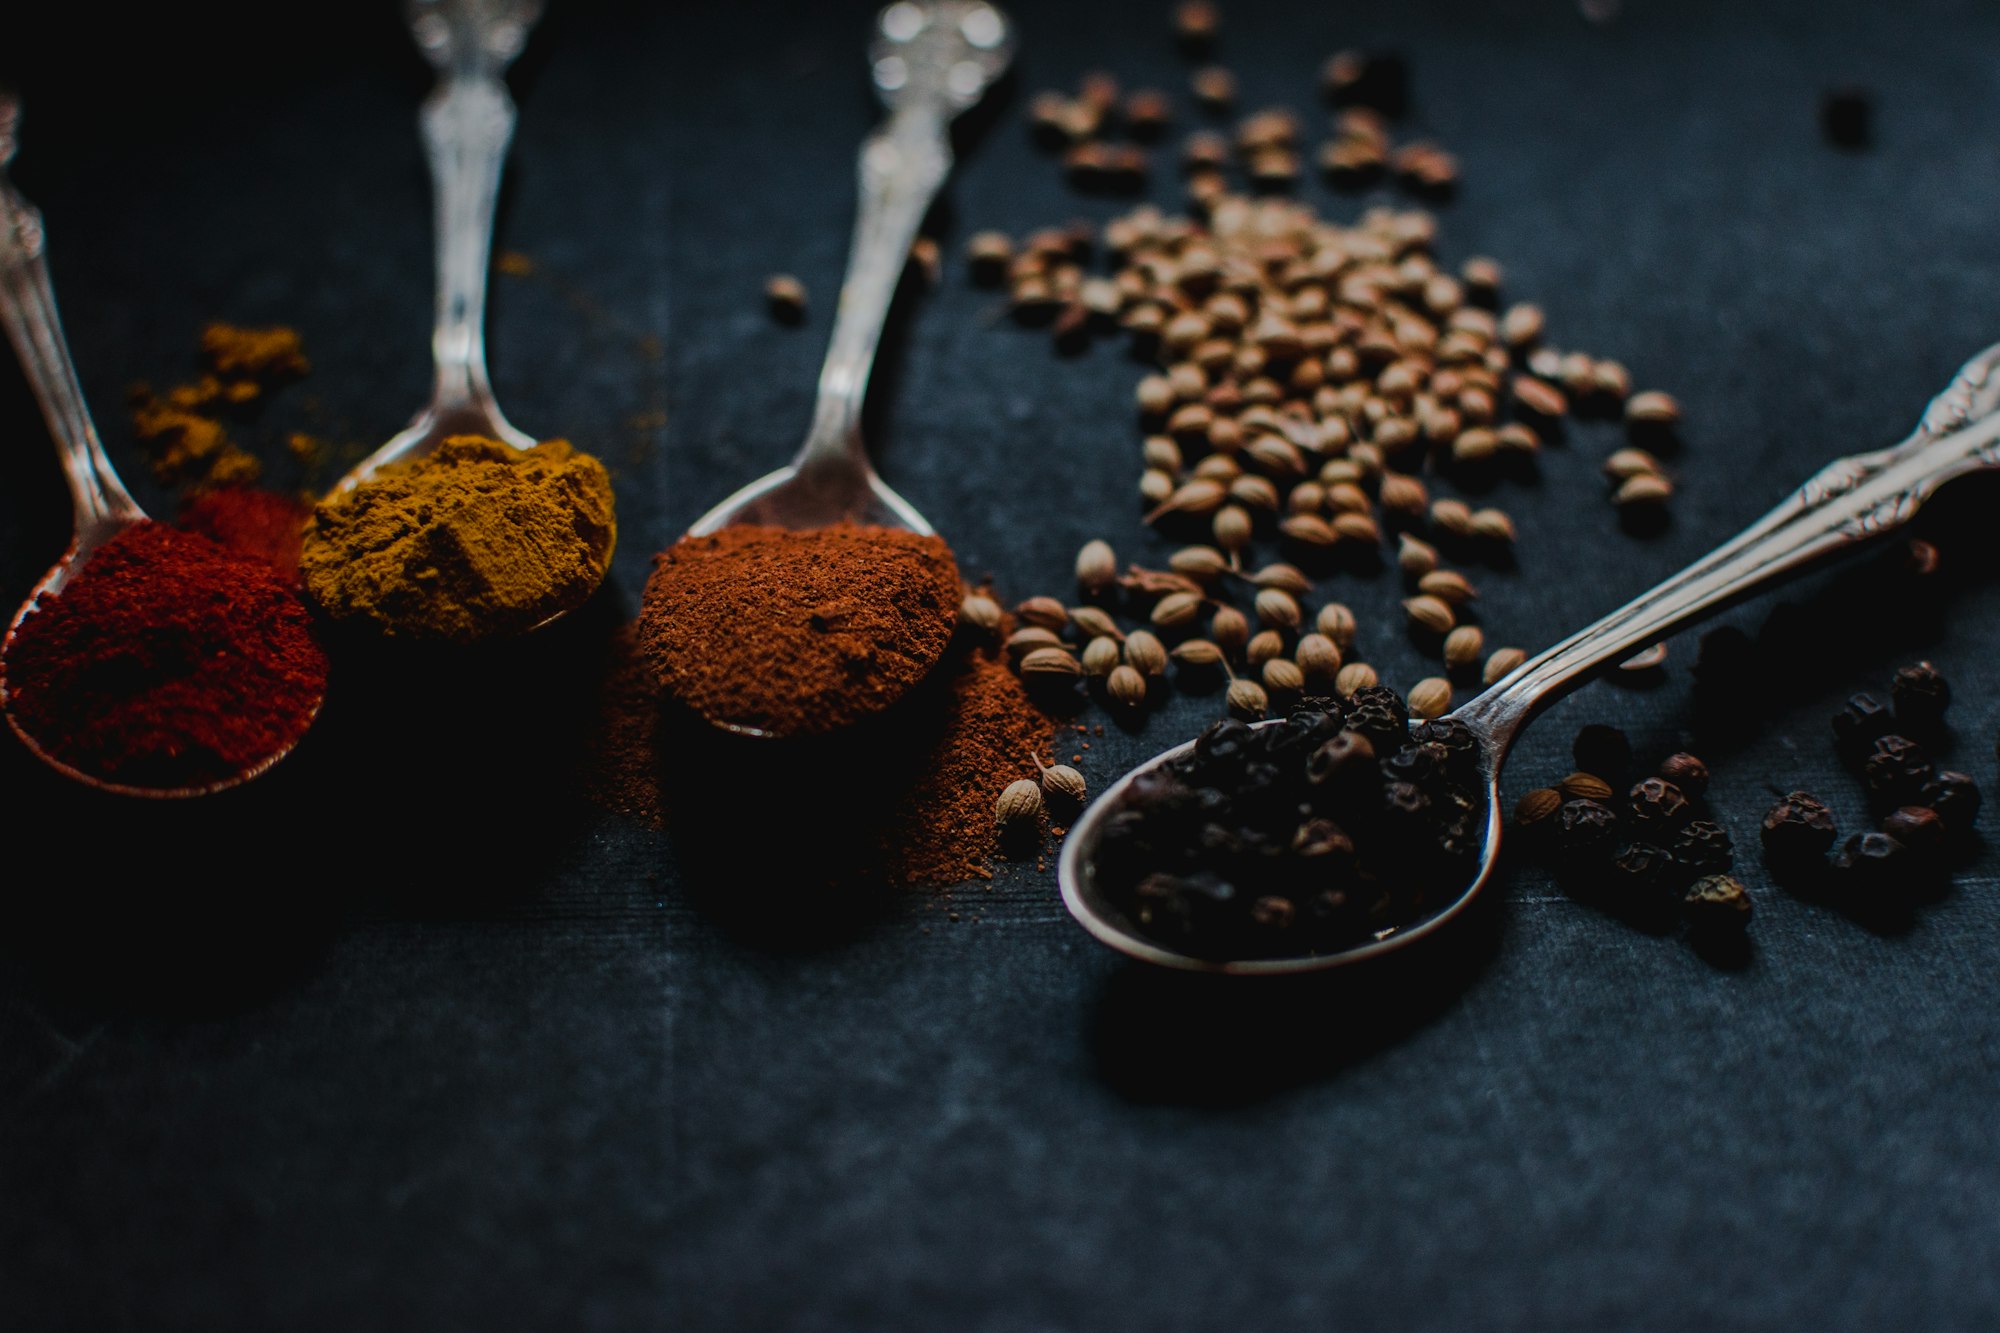 An assortment of some of the essential Indian spices. 
Turmeric is essentially known for its ancient medicinal uses and is predominantly used in almost all kinds of food preparation in India.